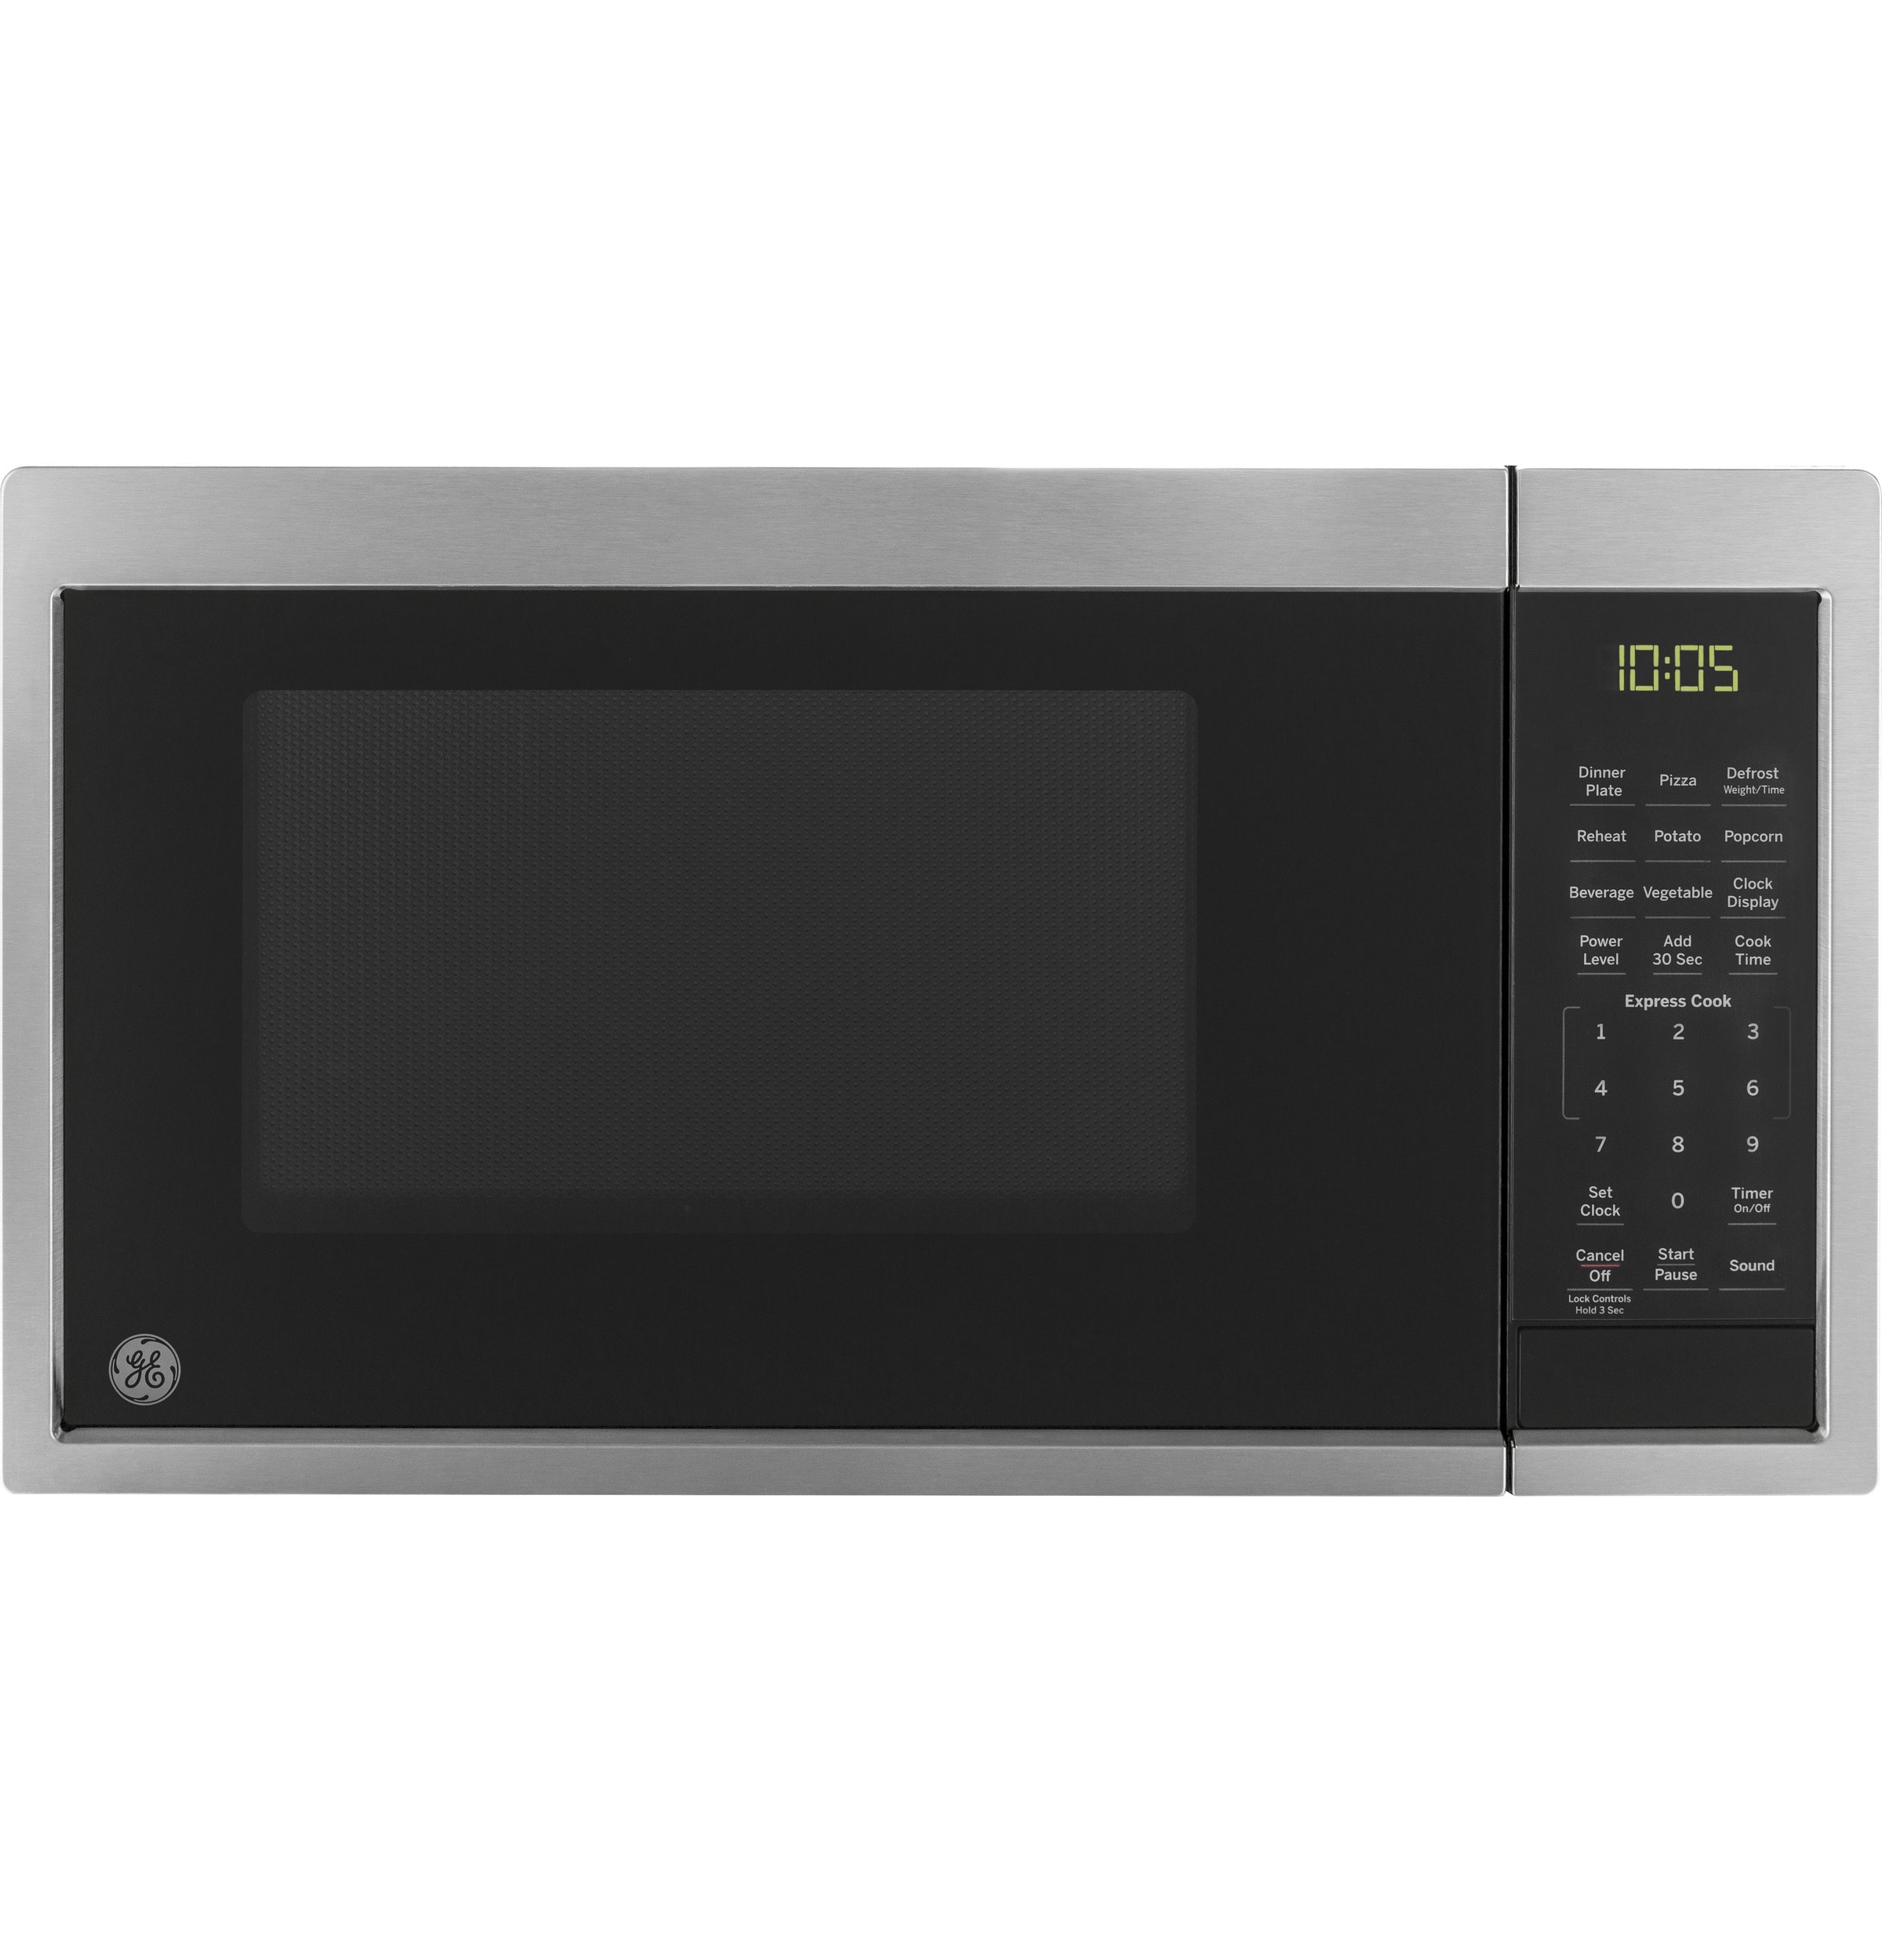 0.9 cu Stainless Steel Countertop Microwave Oven ft 